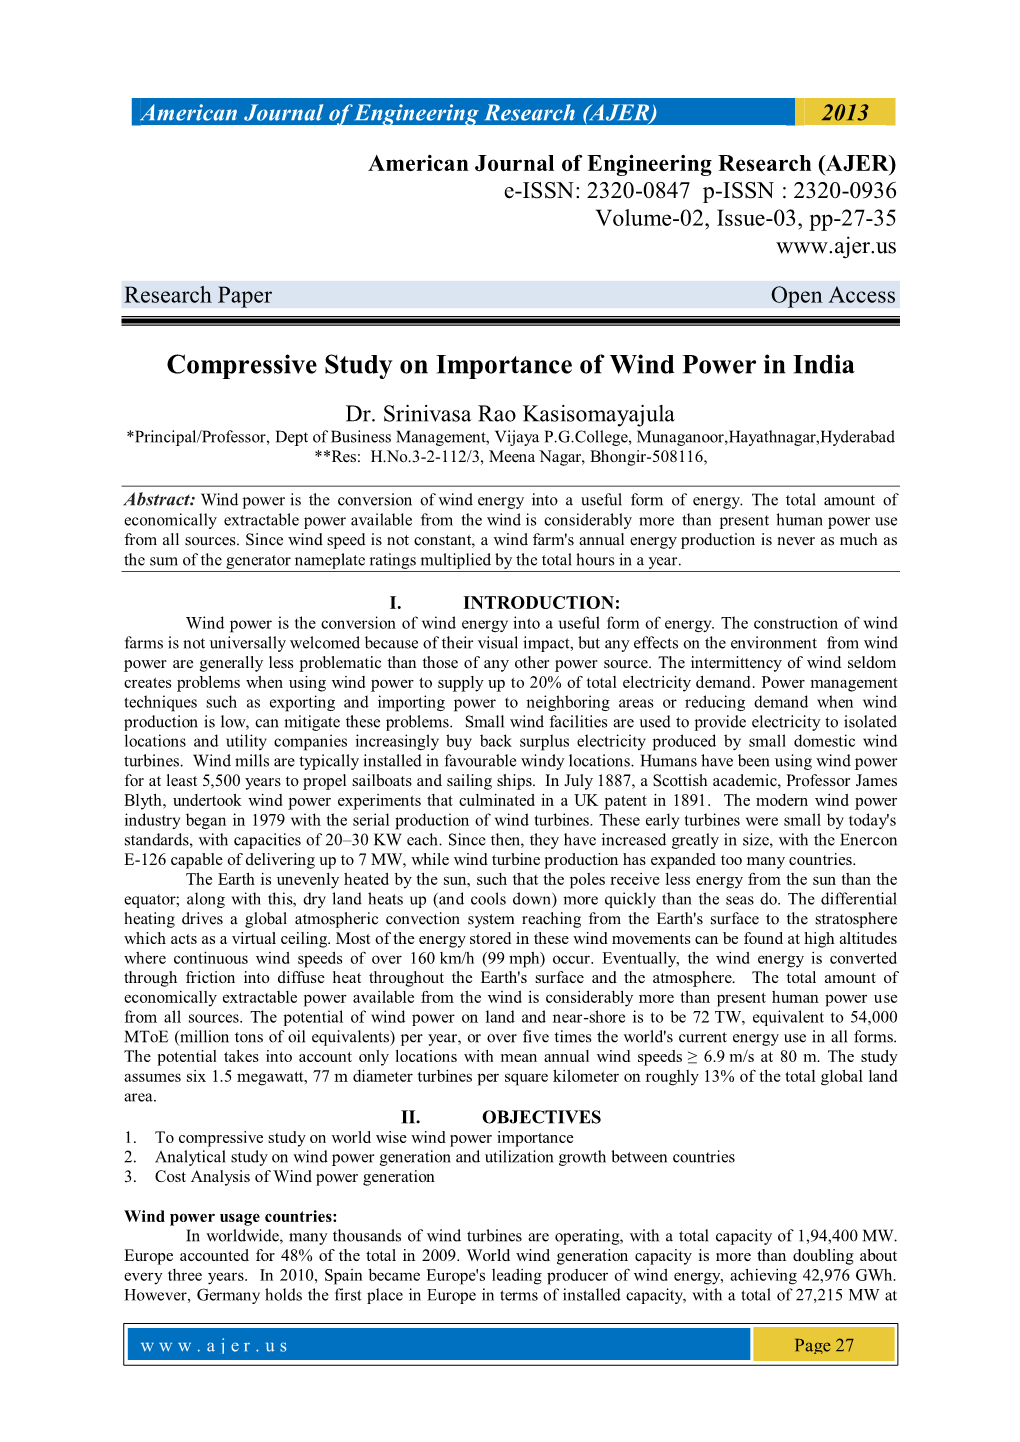 Compressive Study on Importance of Wind Power in India